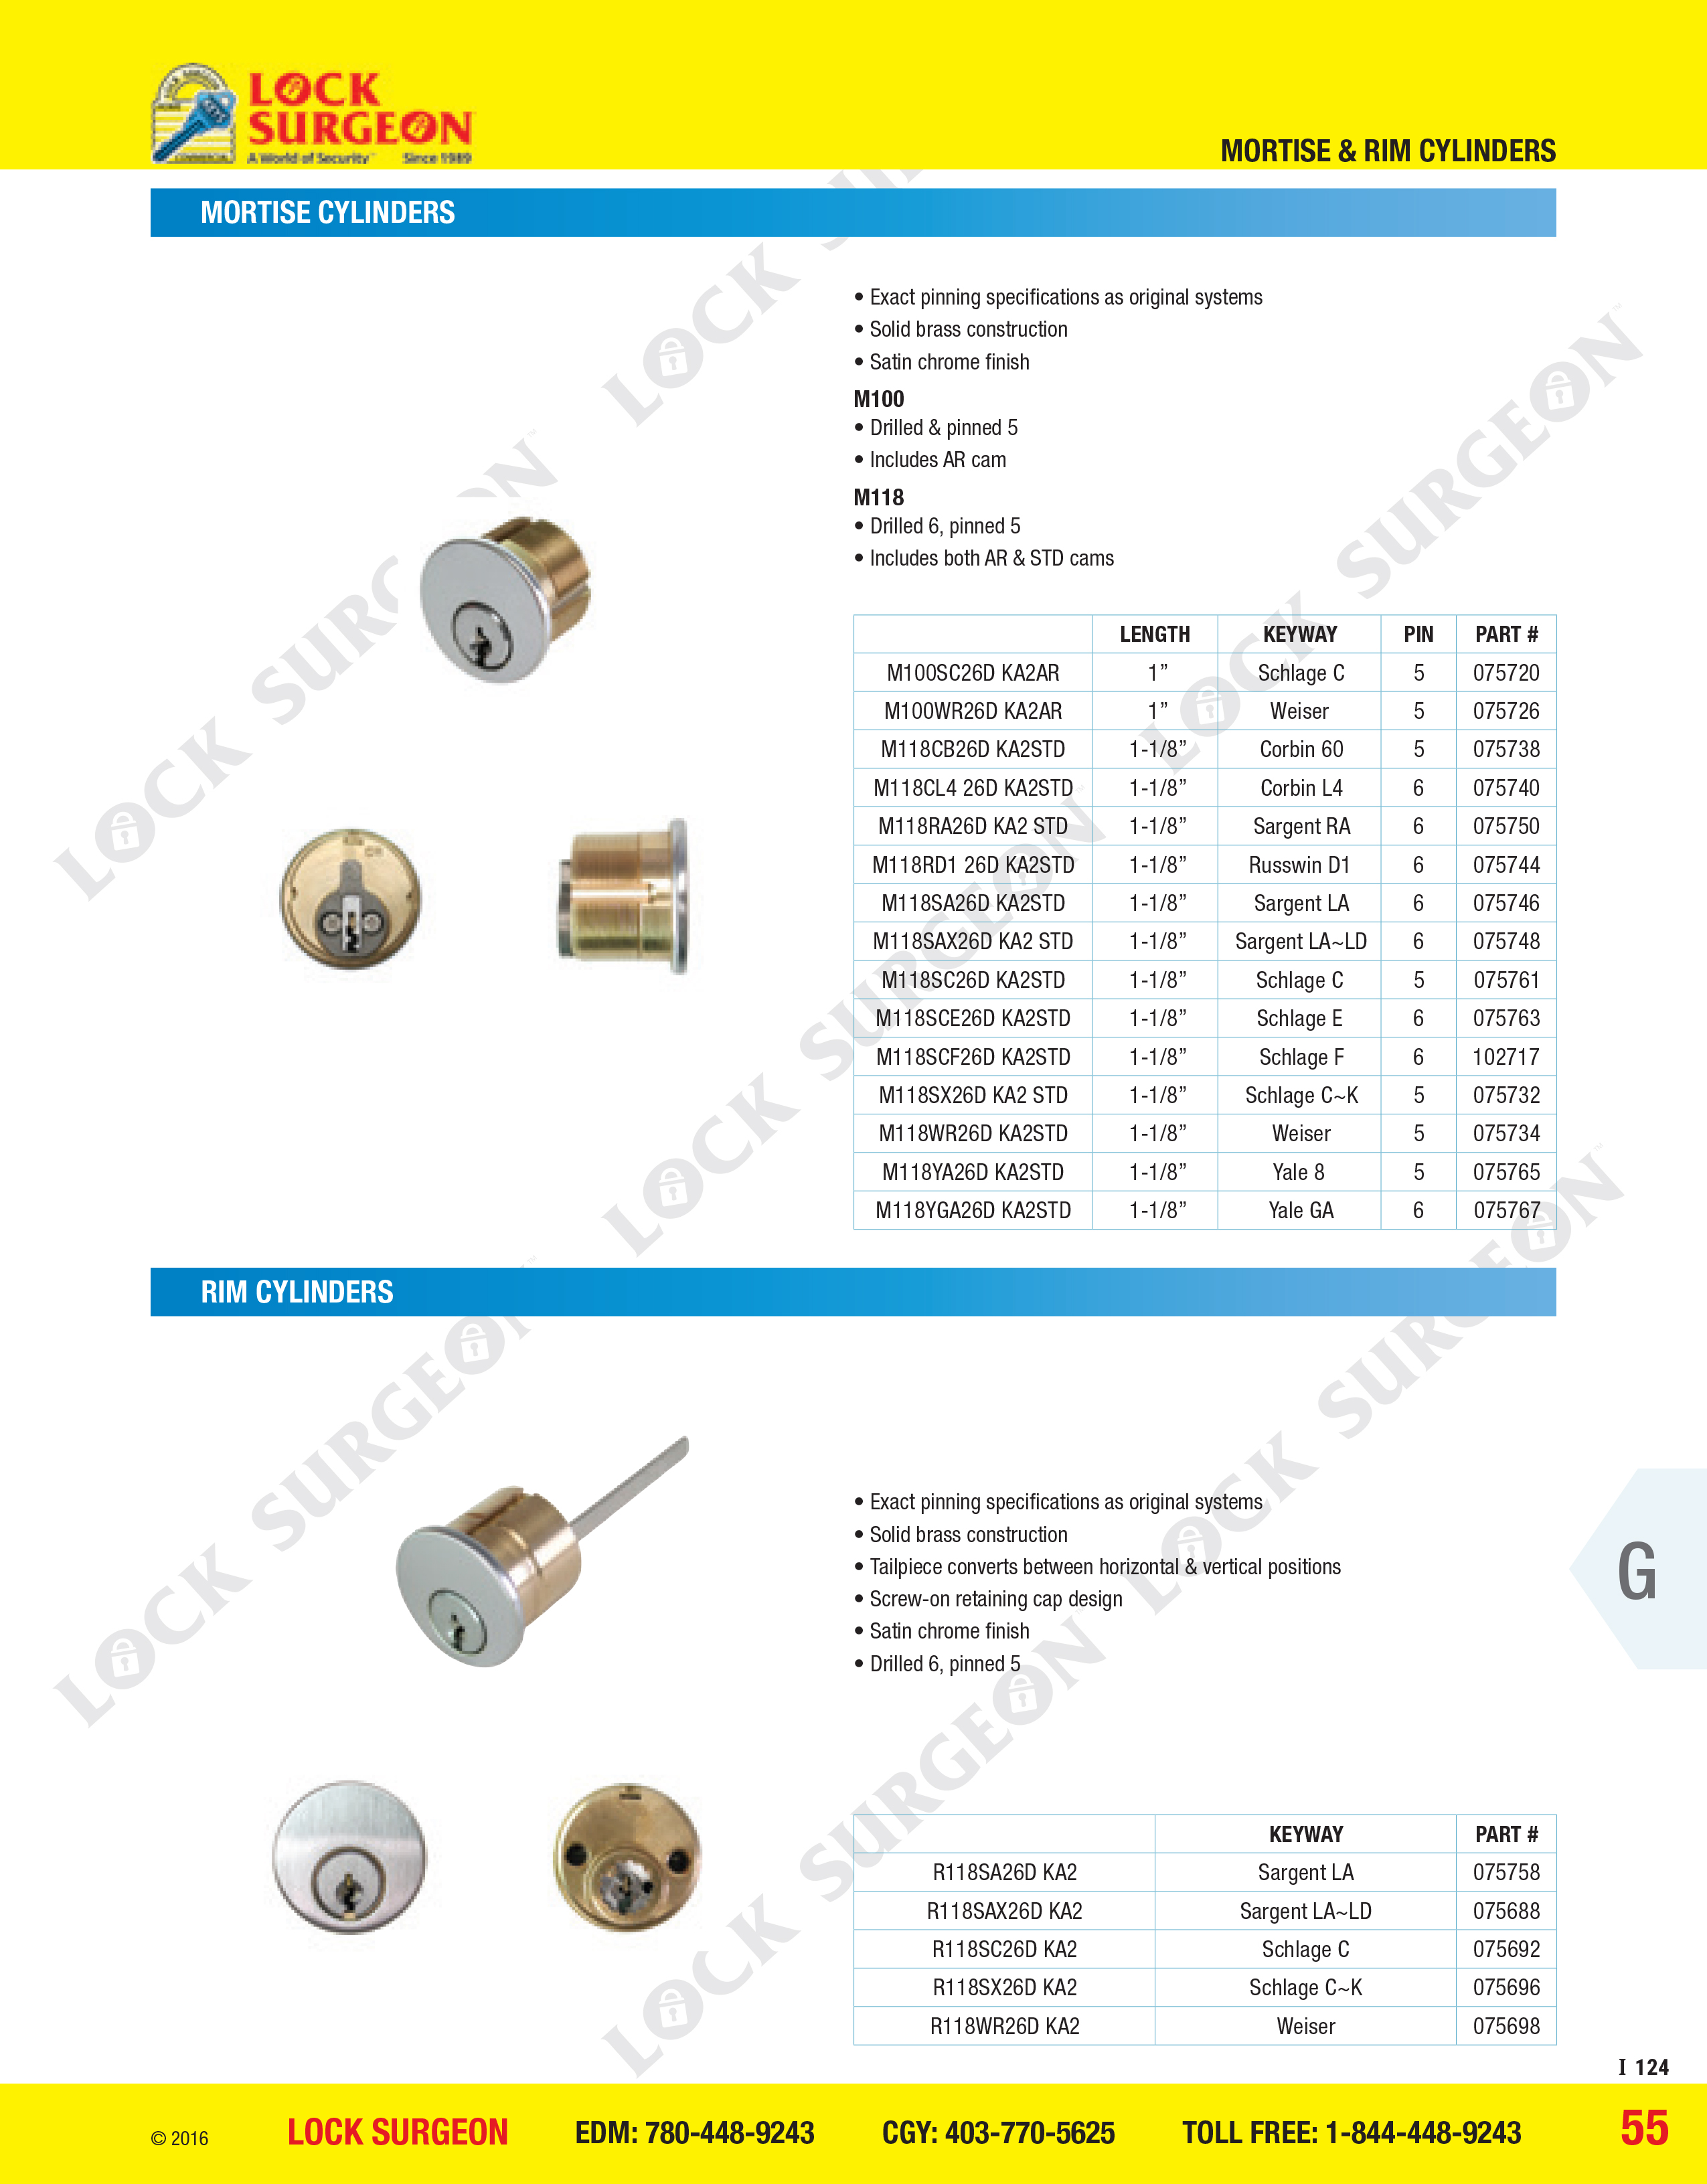 Stony Plain GMS mortise and rim cylinders solid brass construction satin chrome finish.